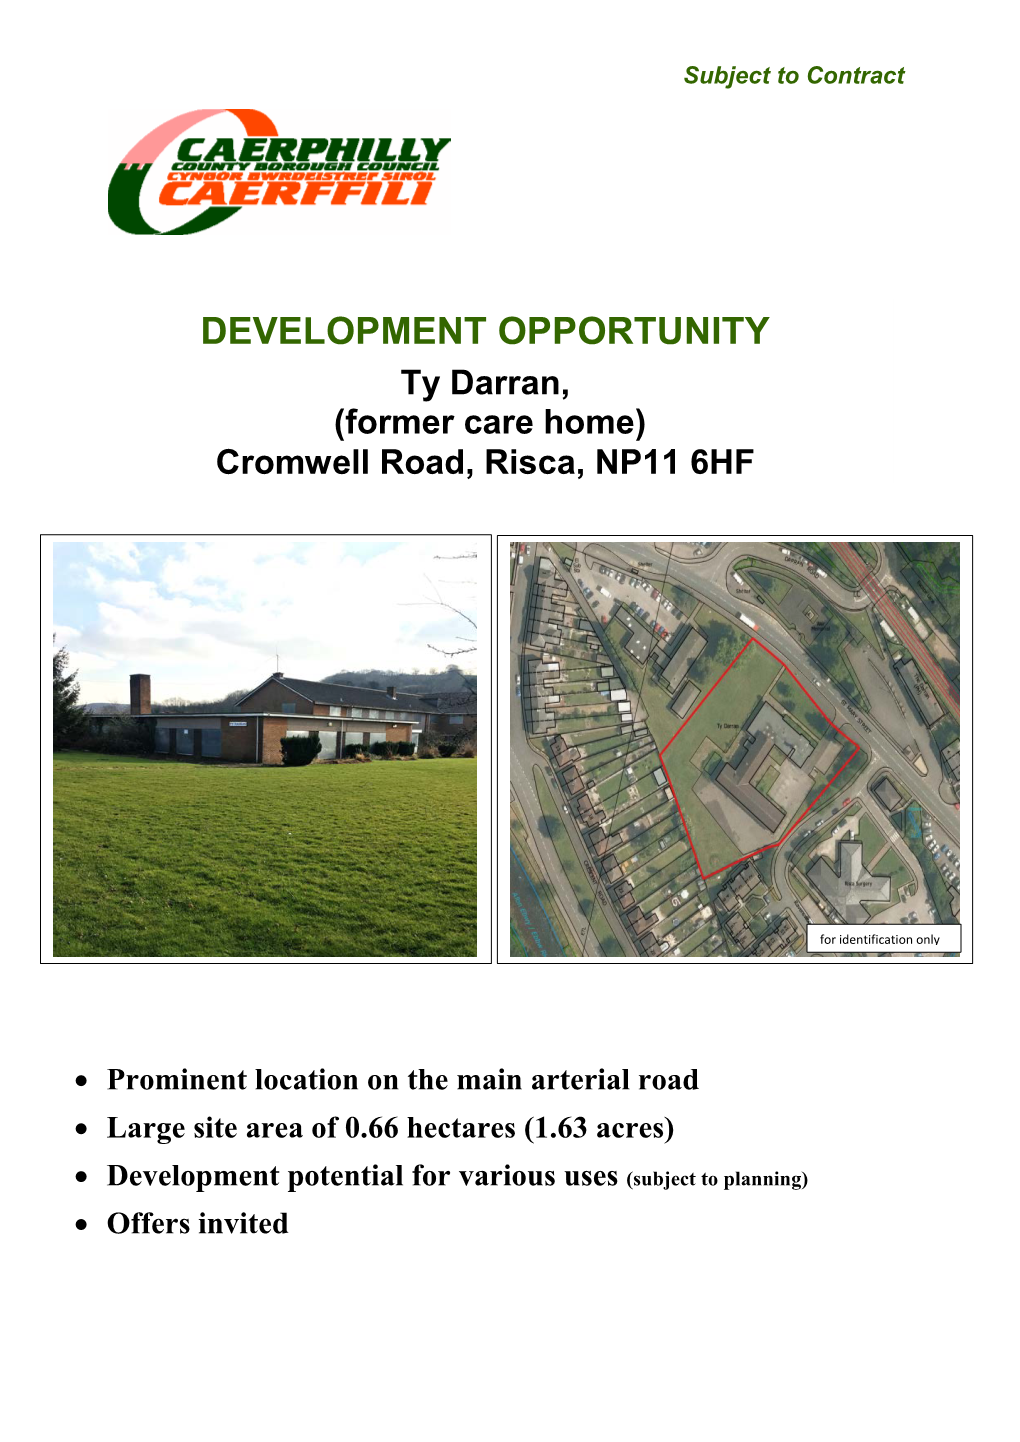 DEVELOPMENT OPPORTUNITY Ty Darran, (Former Care Home) Cromwell Road, Risca, NP11 6HF